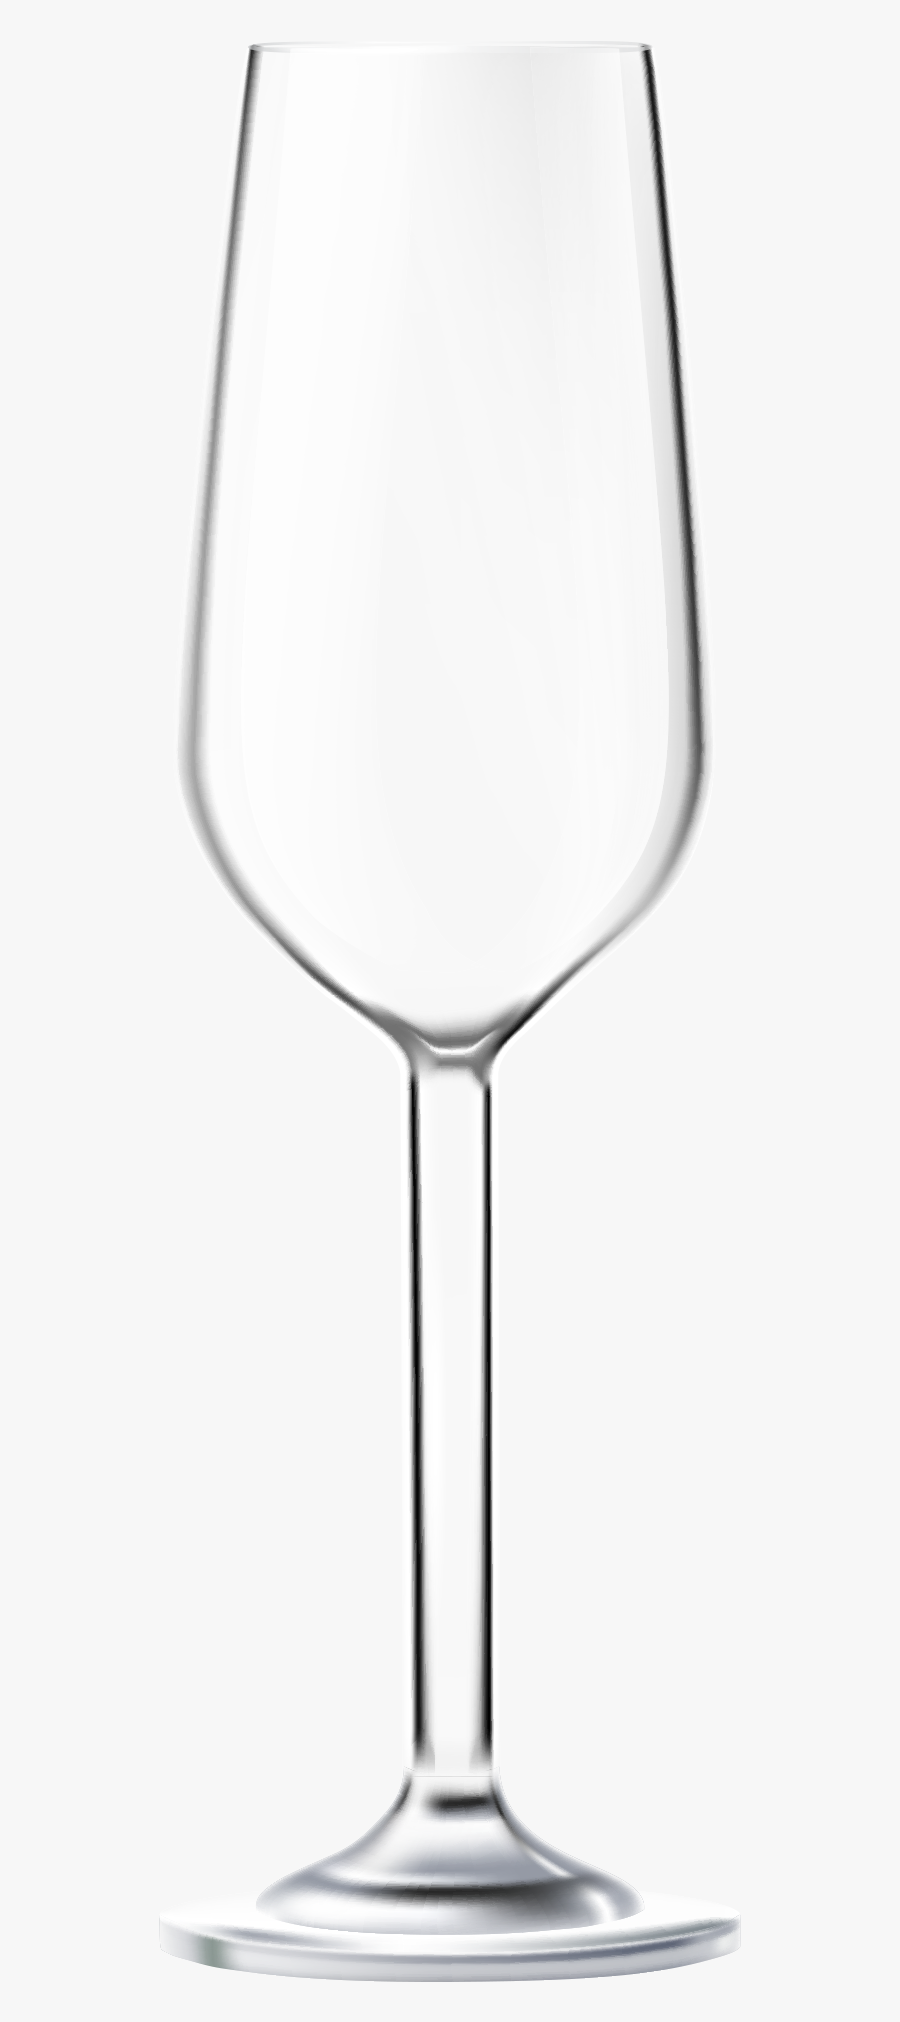 Transparent Wine Glass Cheers Clipart - Wine Glass, Transparent Clipart